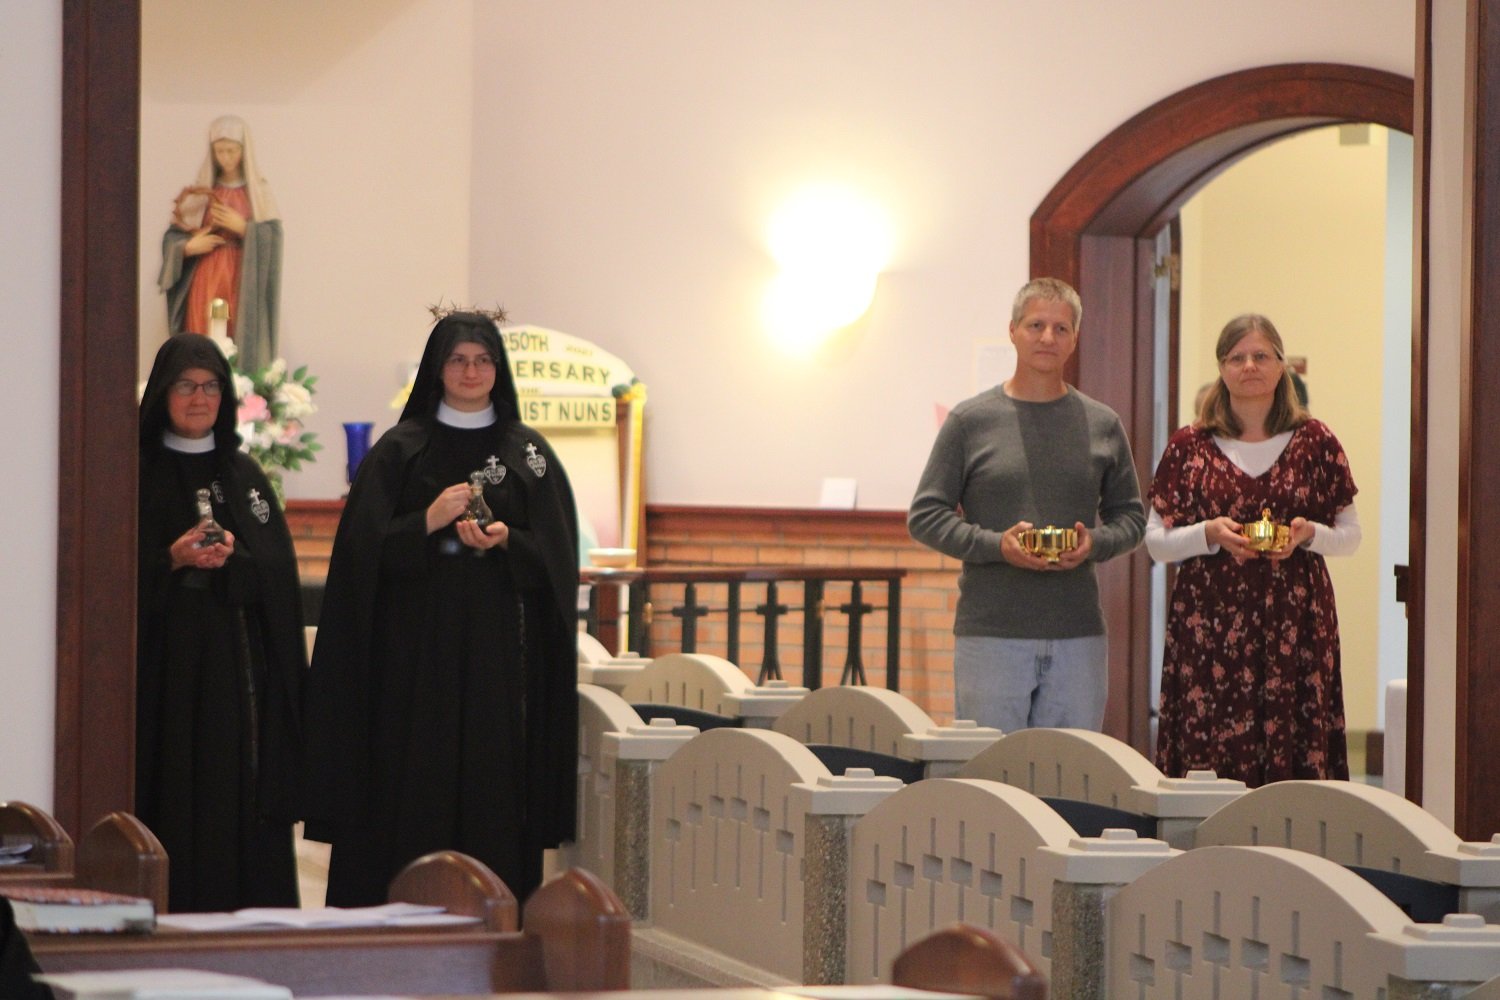  Offertory procession with the newly-professed, her parents, and her Novice Directress, Sr. Mary Veronica 